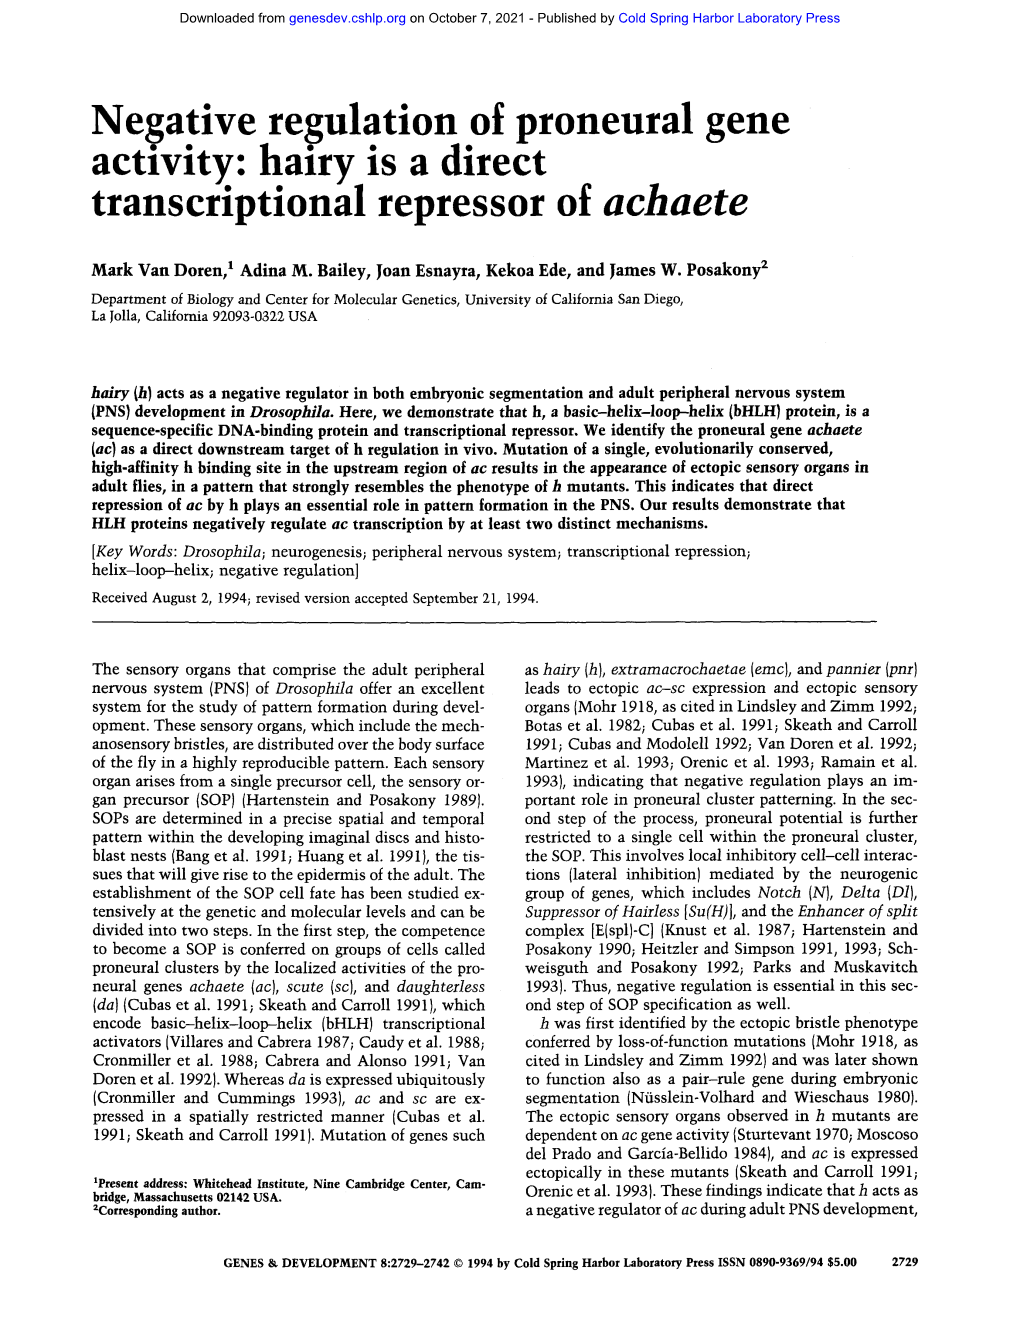 Negative Regulation of Proneural Gene Activity: Hairy Is a Direct Transcriptional Repressor of Achaete